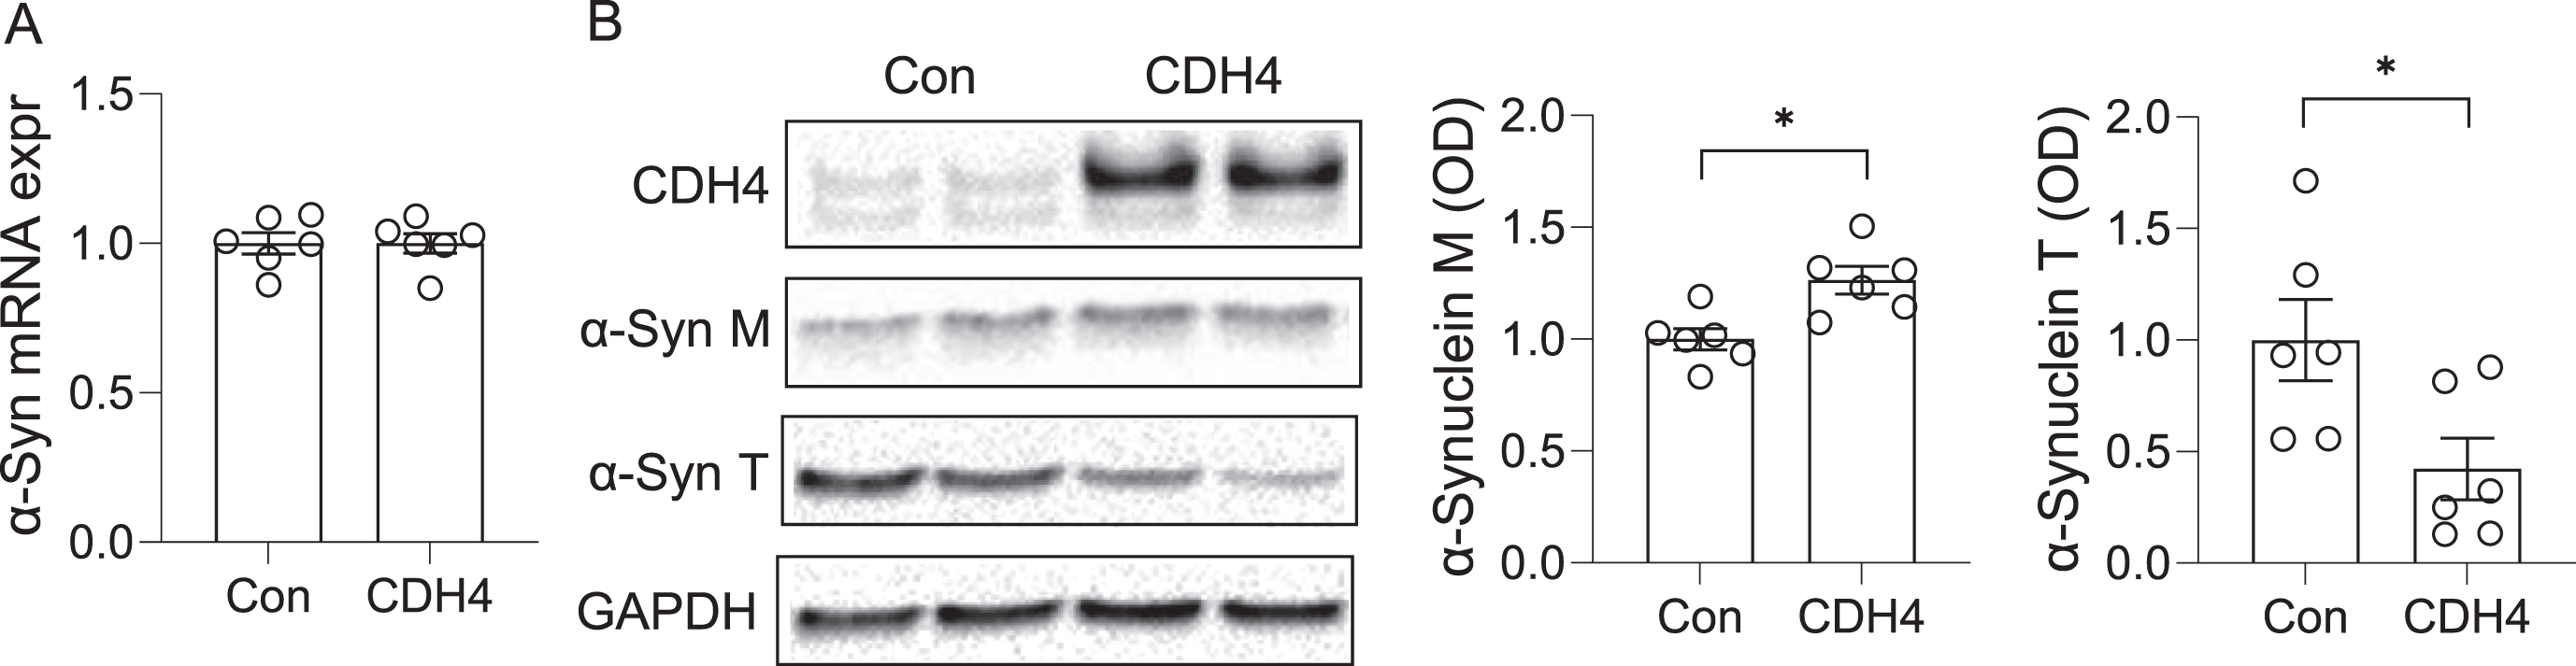 Effect of CDH4 on α-synuclein levels. MO3.13 oligodendrocyte cells were transfected with CDH4 cDNA or empty-vector control (Con) and α-synuclein expression measured by qPCR (A) and western blotting (B). Optical density of α-synuclein monomeric (M) and trimeric (T) bands were measured and normalized to GAPDH. Data represent mean and SE as error bars; *p < 0.05.